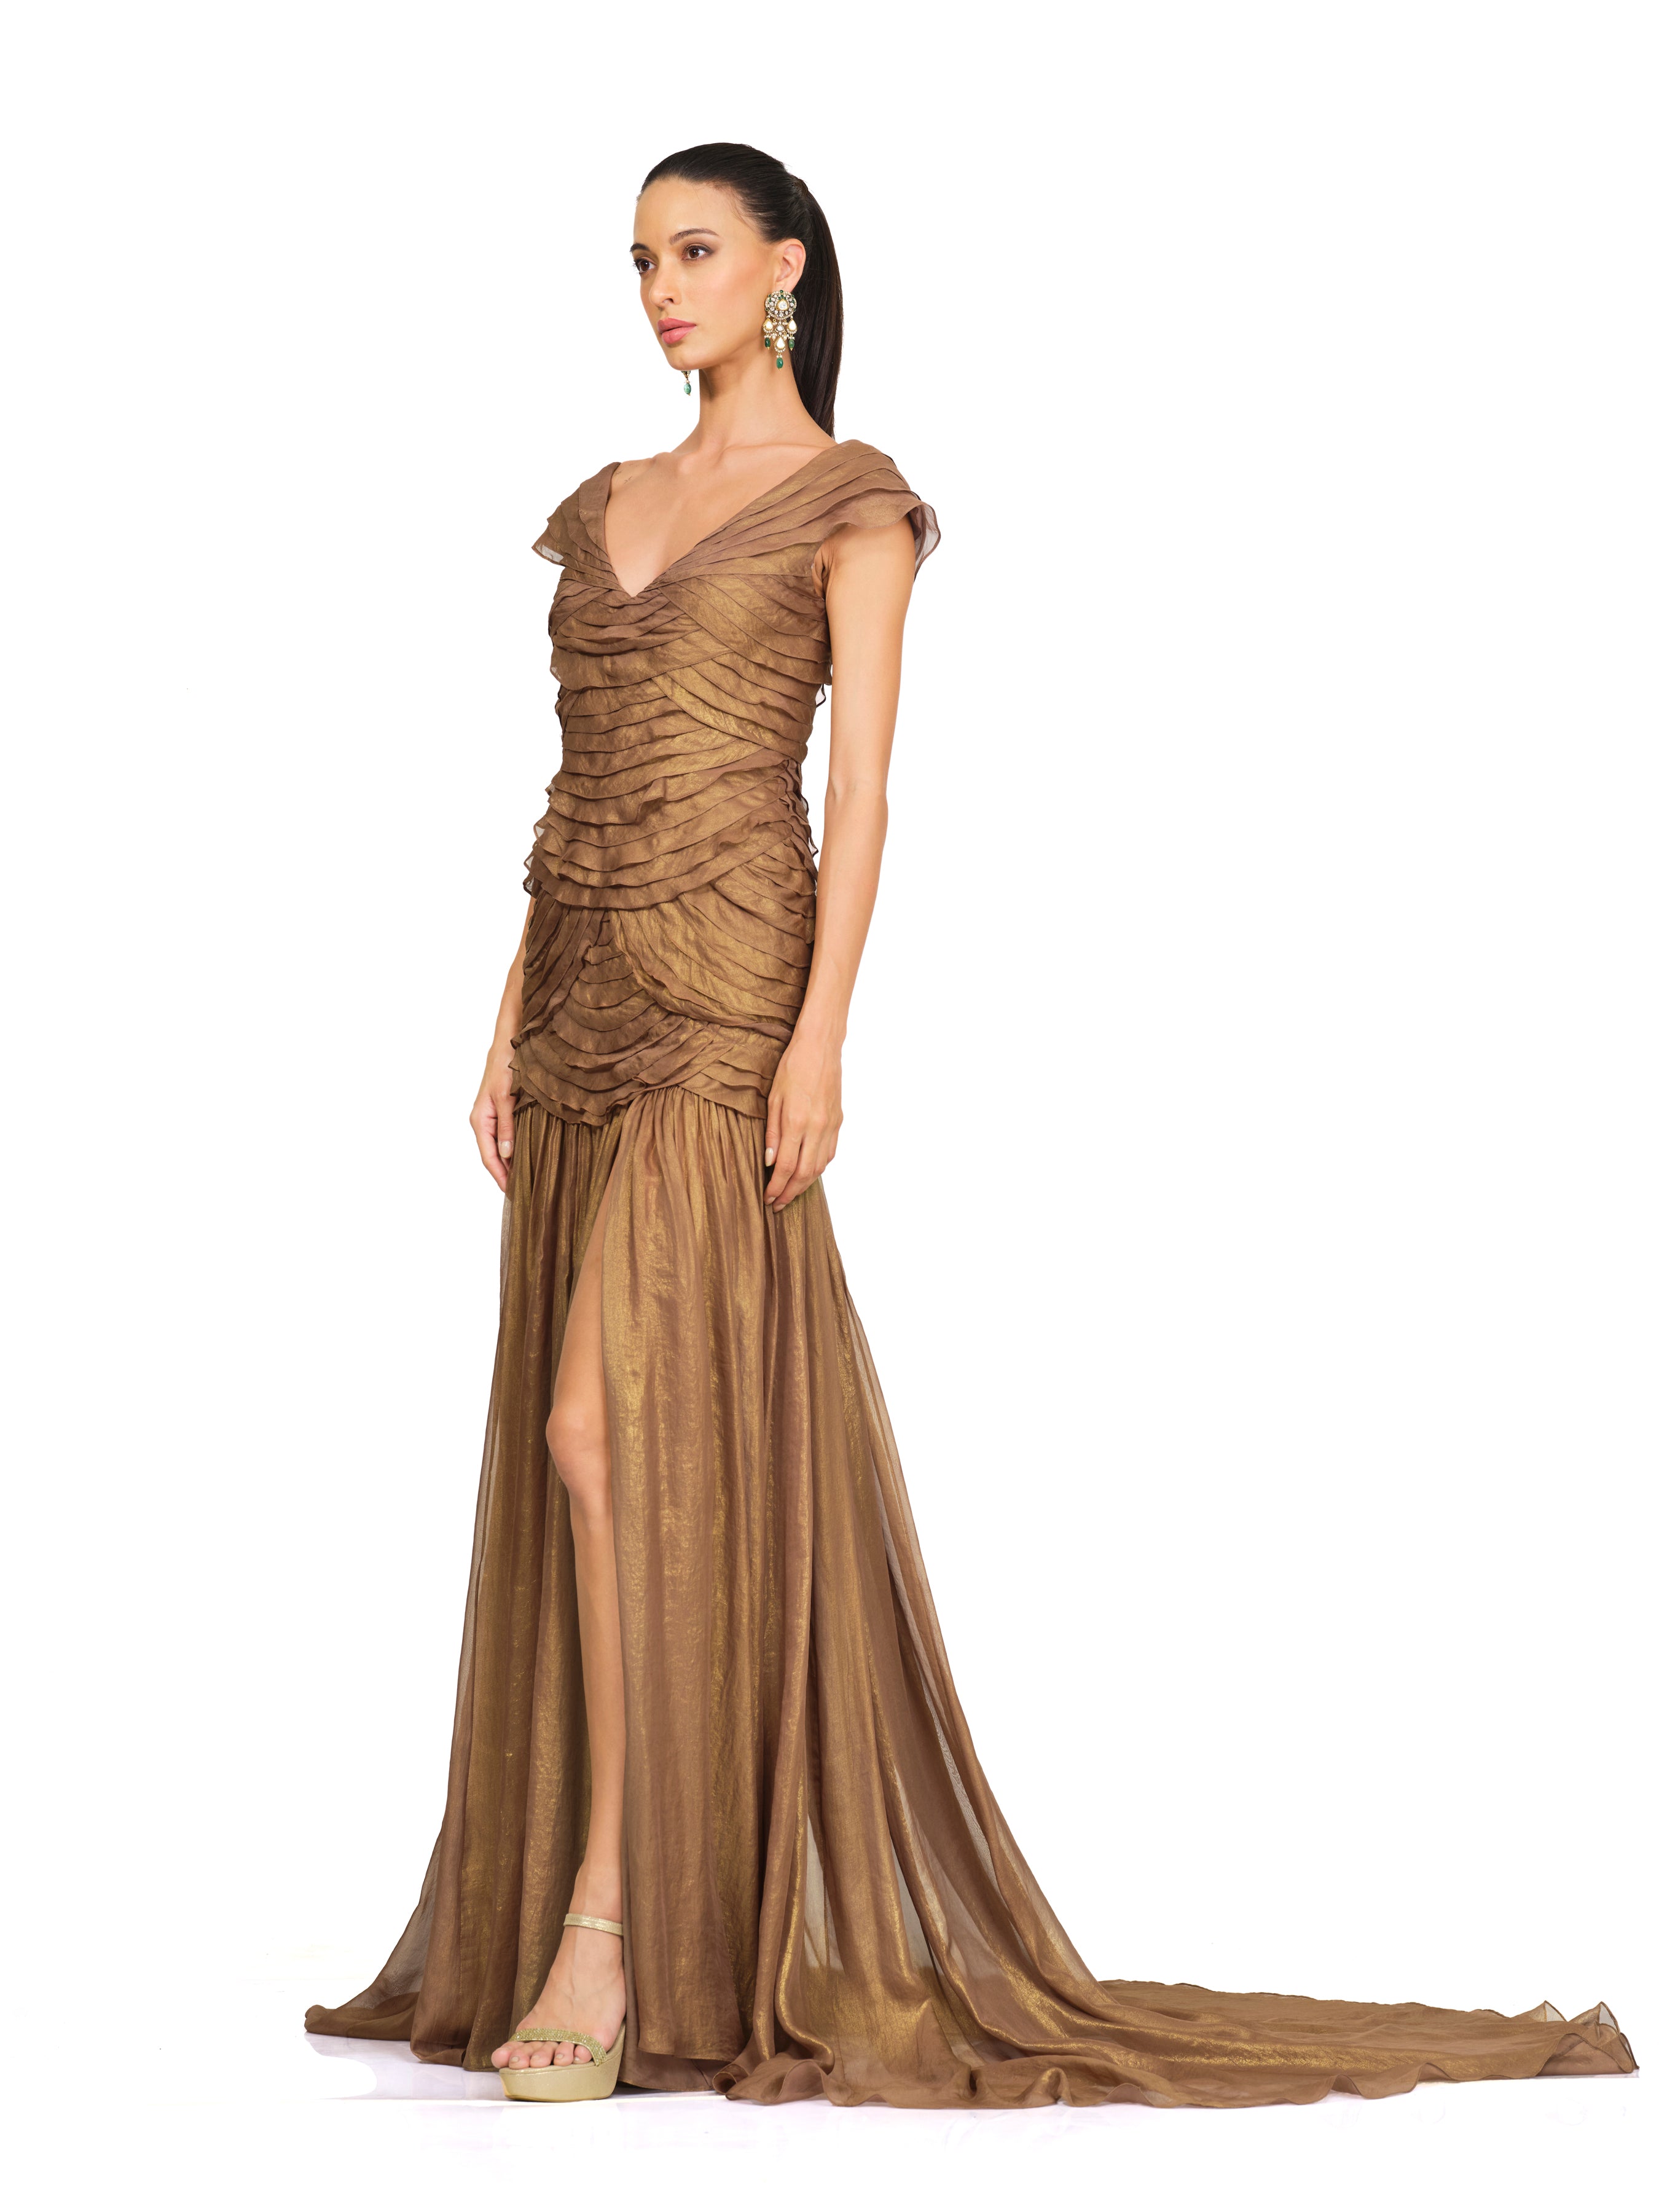 Metallic Gown With High Slit